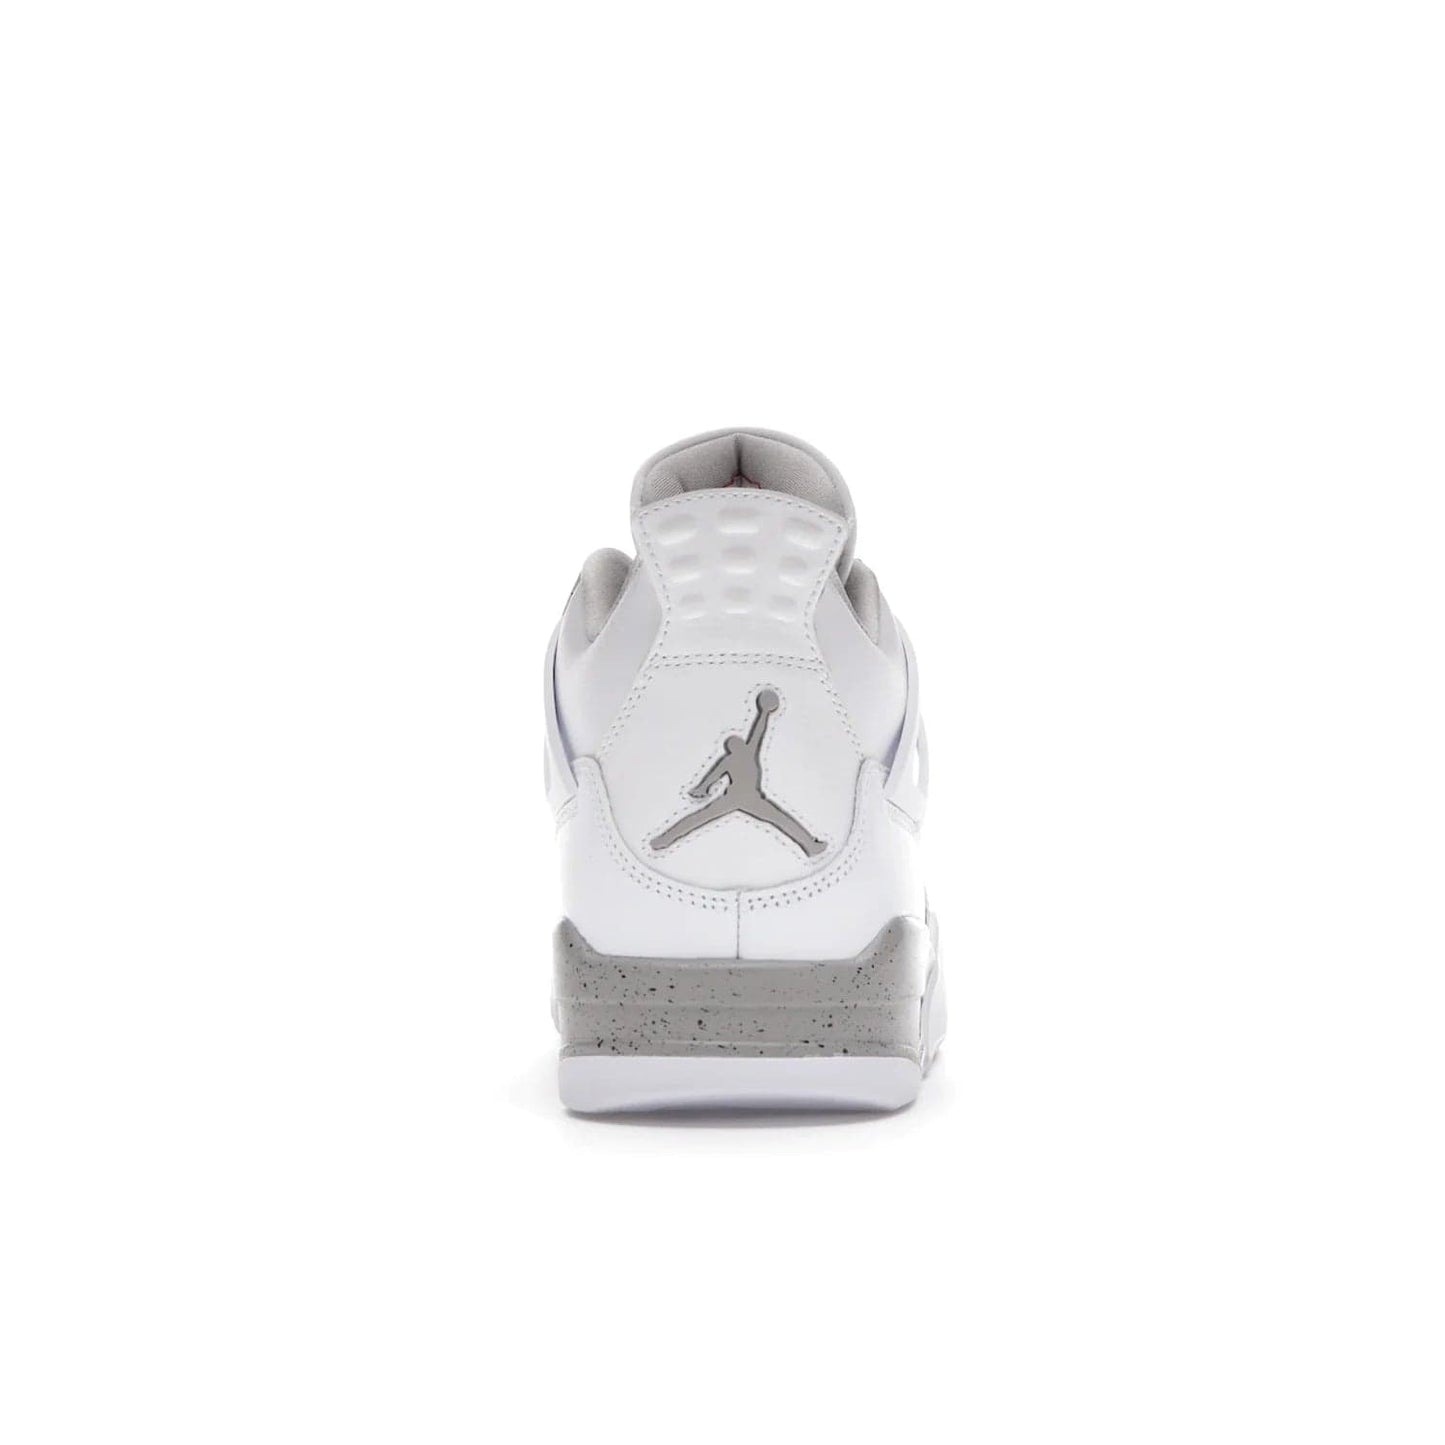 Jordan 4 Retro White Oreo (2021) - Image 28 - Only at www.BallersClubKickz.com - Update your sneaker style with the Air Jordan 4 Retro White Oreo. Limited-edition sneaker features white leather and mesh upper, Tech Grey eyelets and midsole, Jumpman logo embroidered on the tongue, and more. Released exclusively on Saturday, July 3rd.